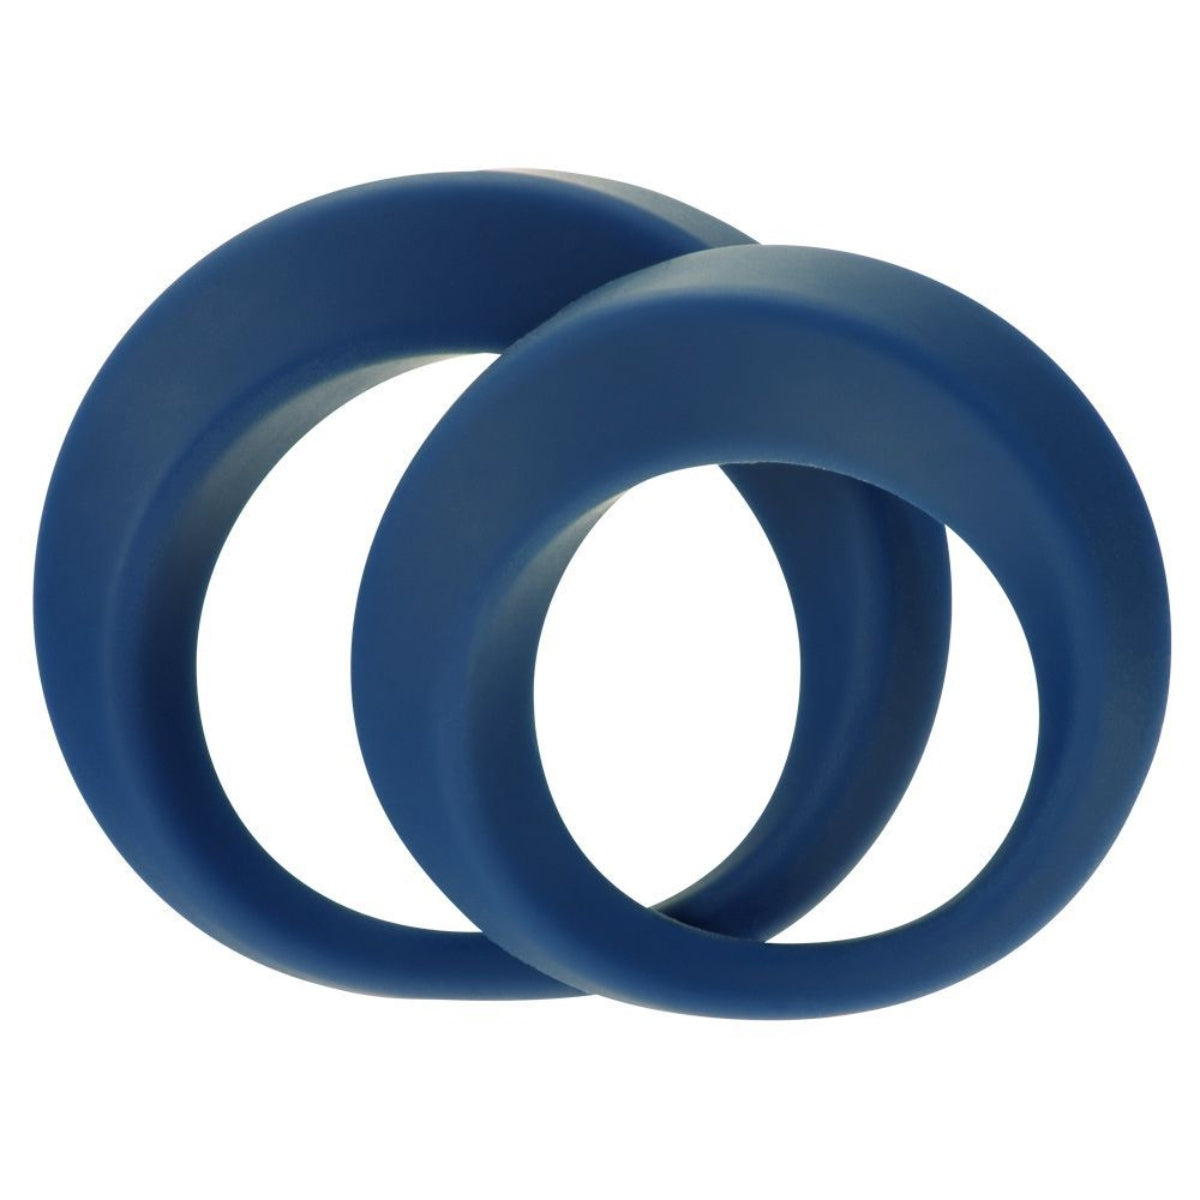 Me You Us Perfect Twist Cock Ring 2 Pack Silicone Blue - Simply Pleasure